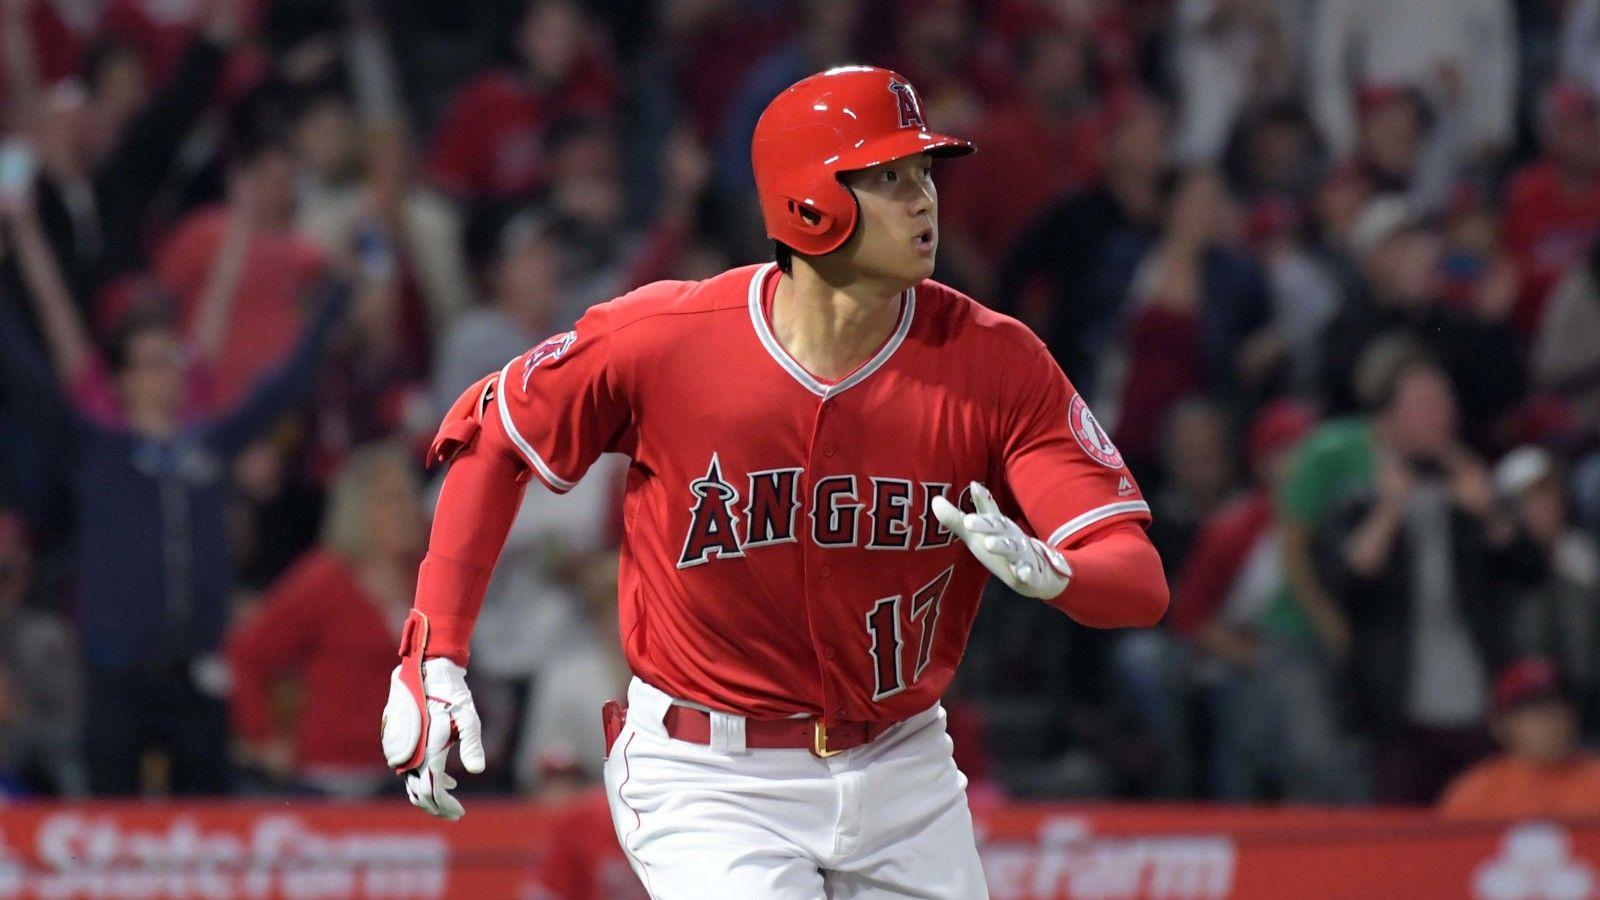 Shohei Ohtani ignored by teammates after hitting first career MLB